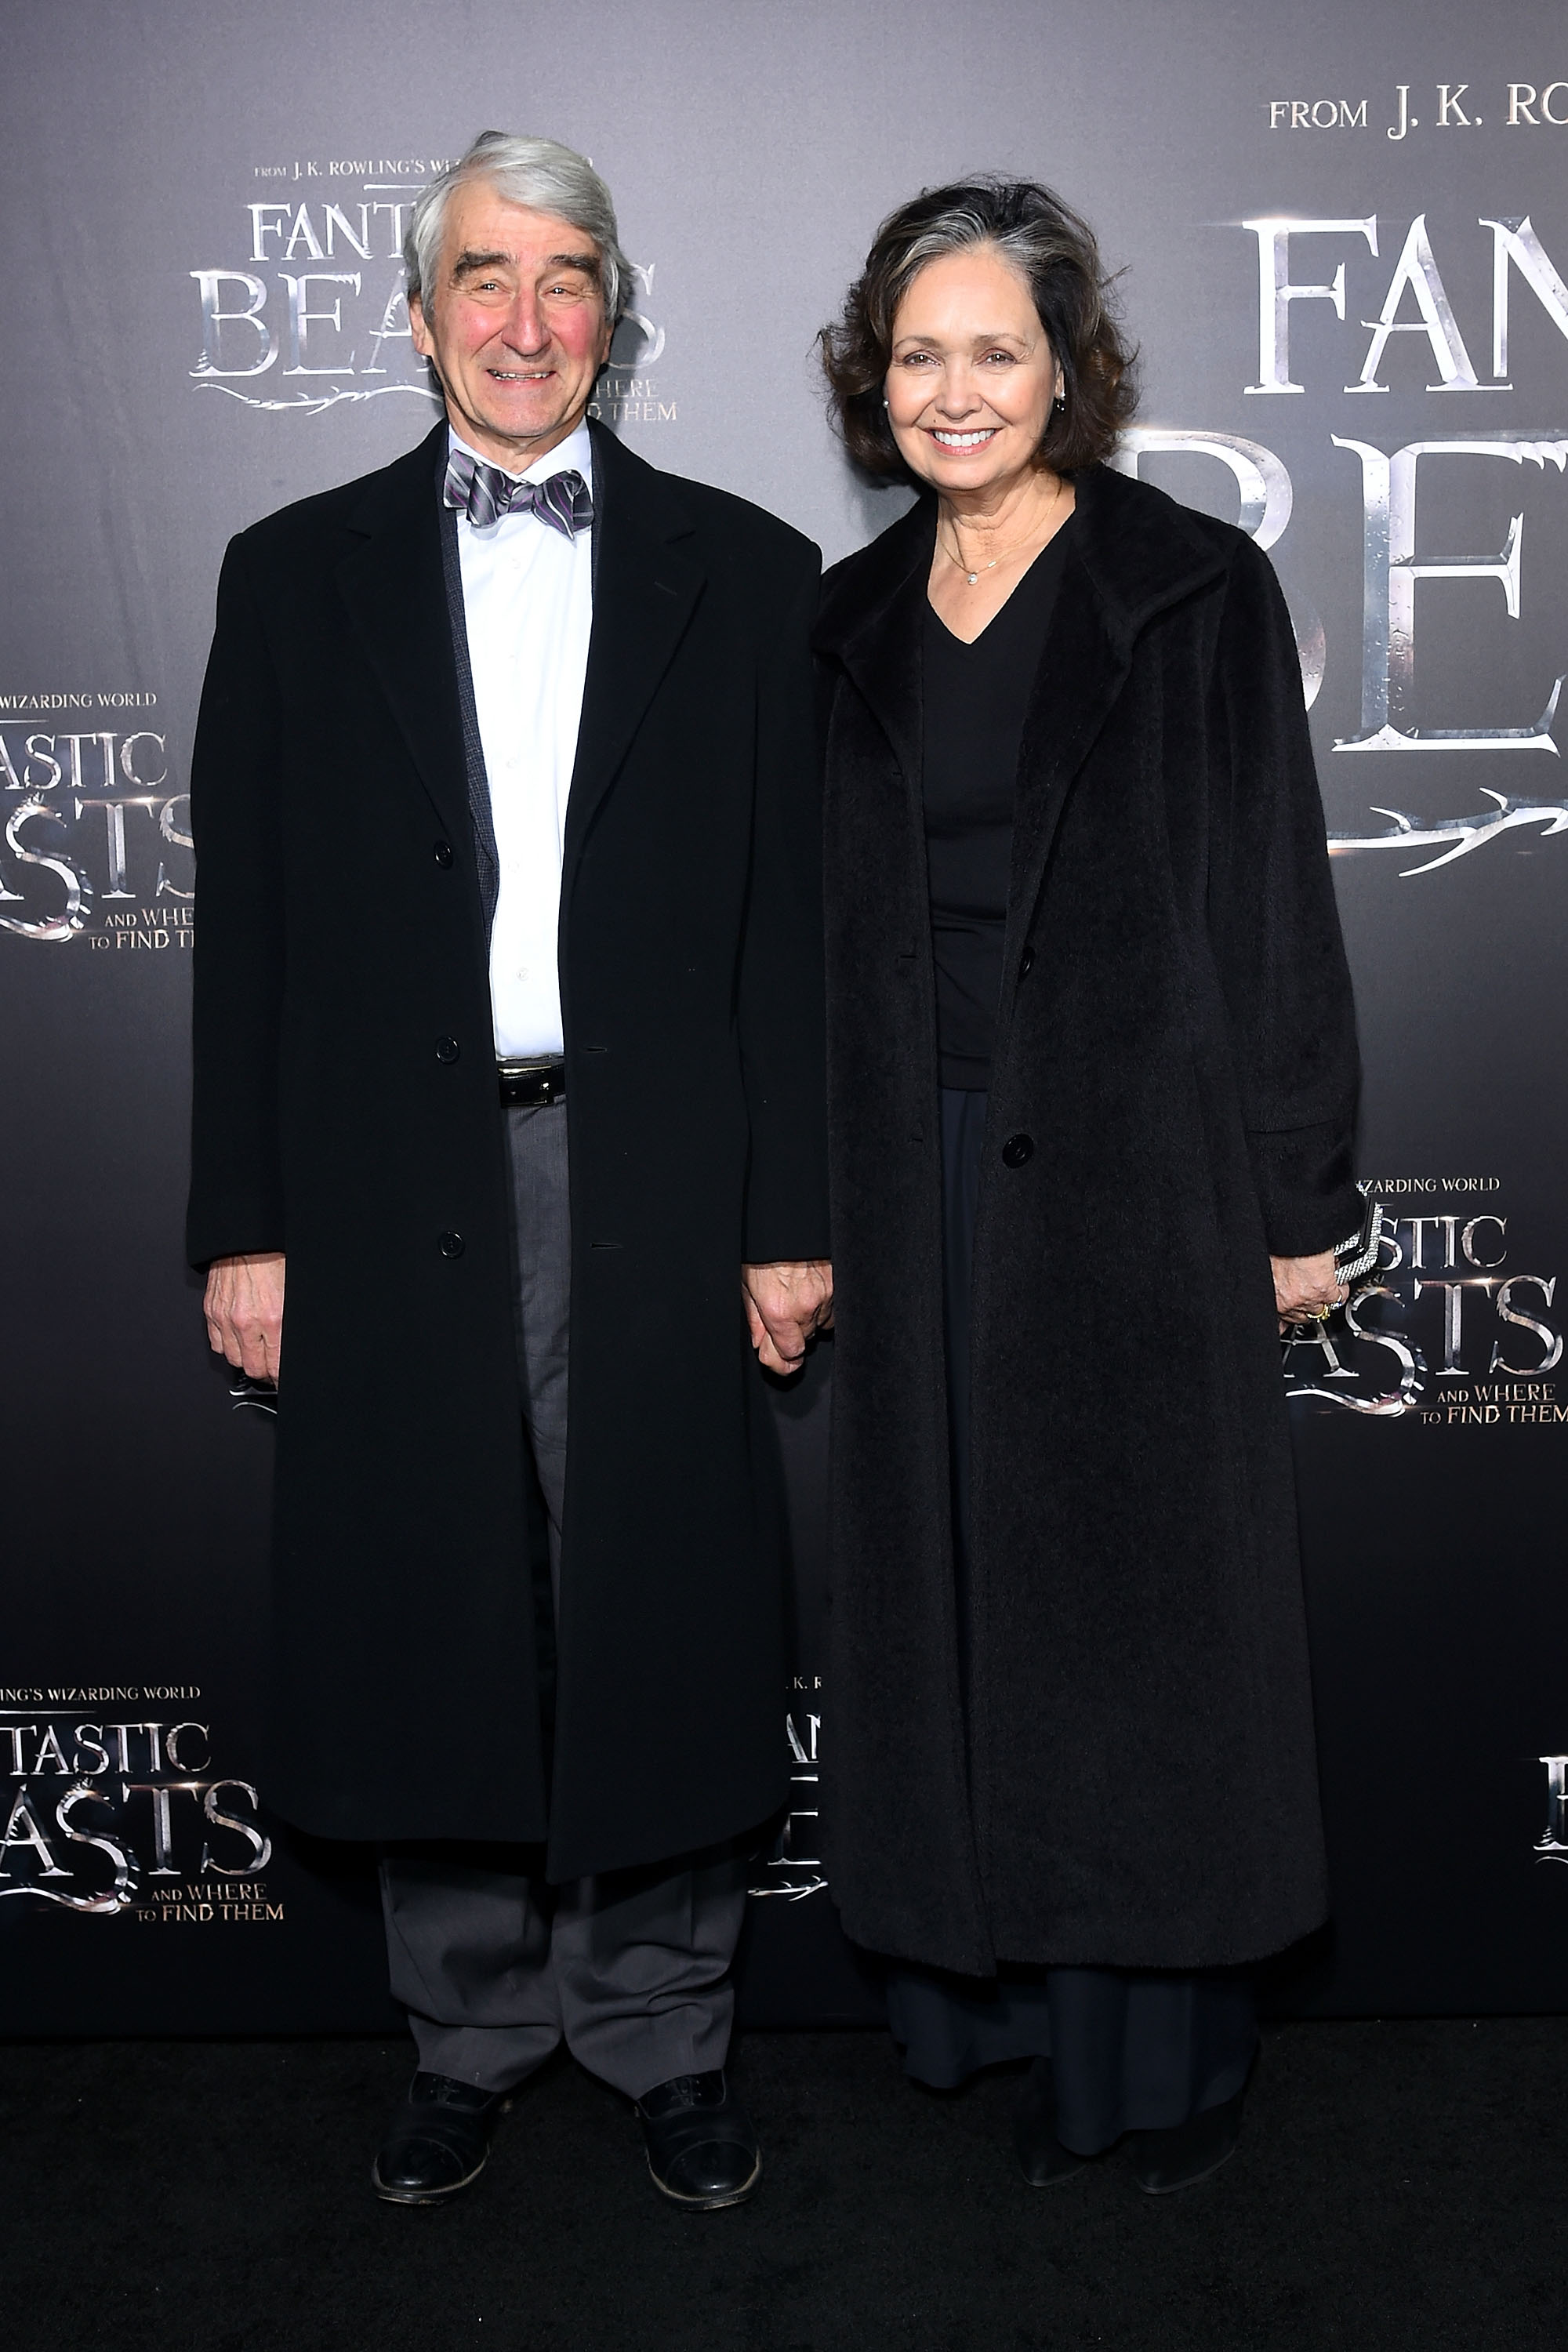 Sam Waterston and wife Lynn Louisa Woodruff attend the Fantastic Beasts And Where To Find Them World Premiere at Lincoln Center on November 10, 2016, in New York City